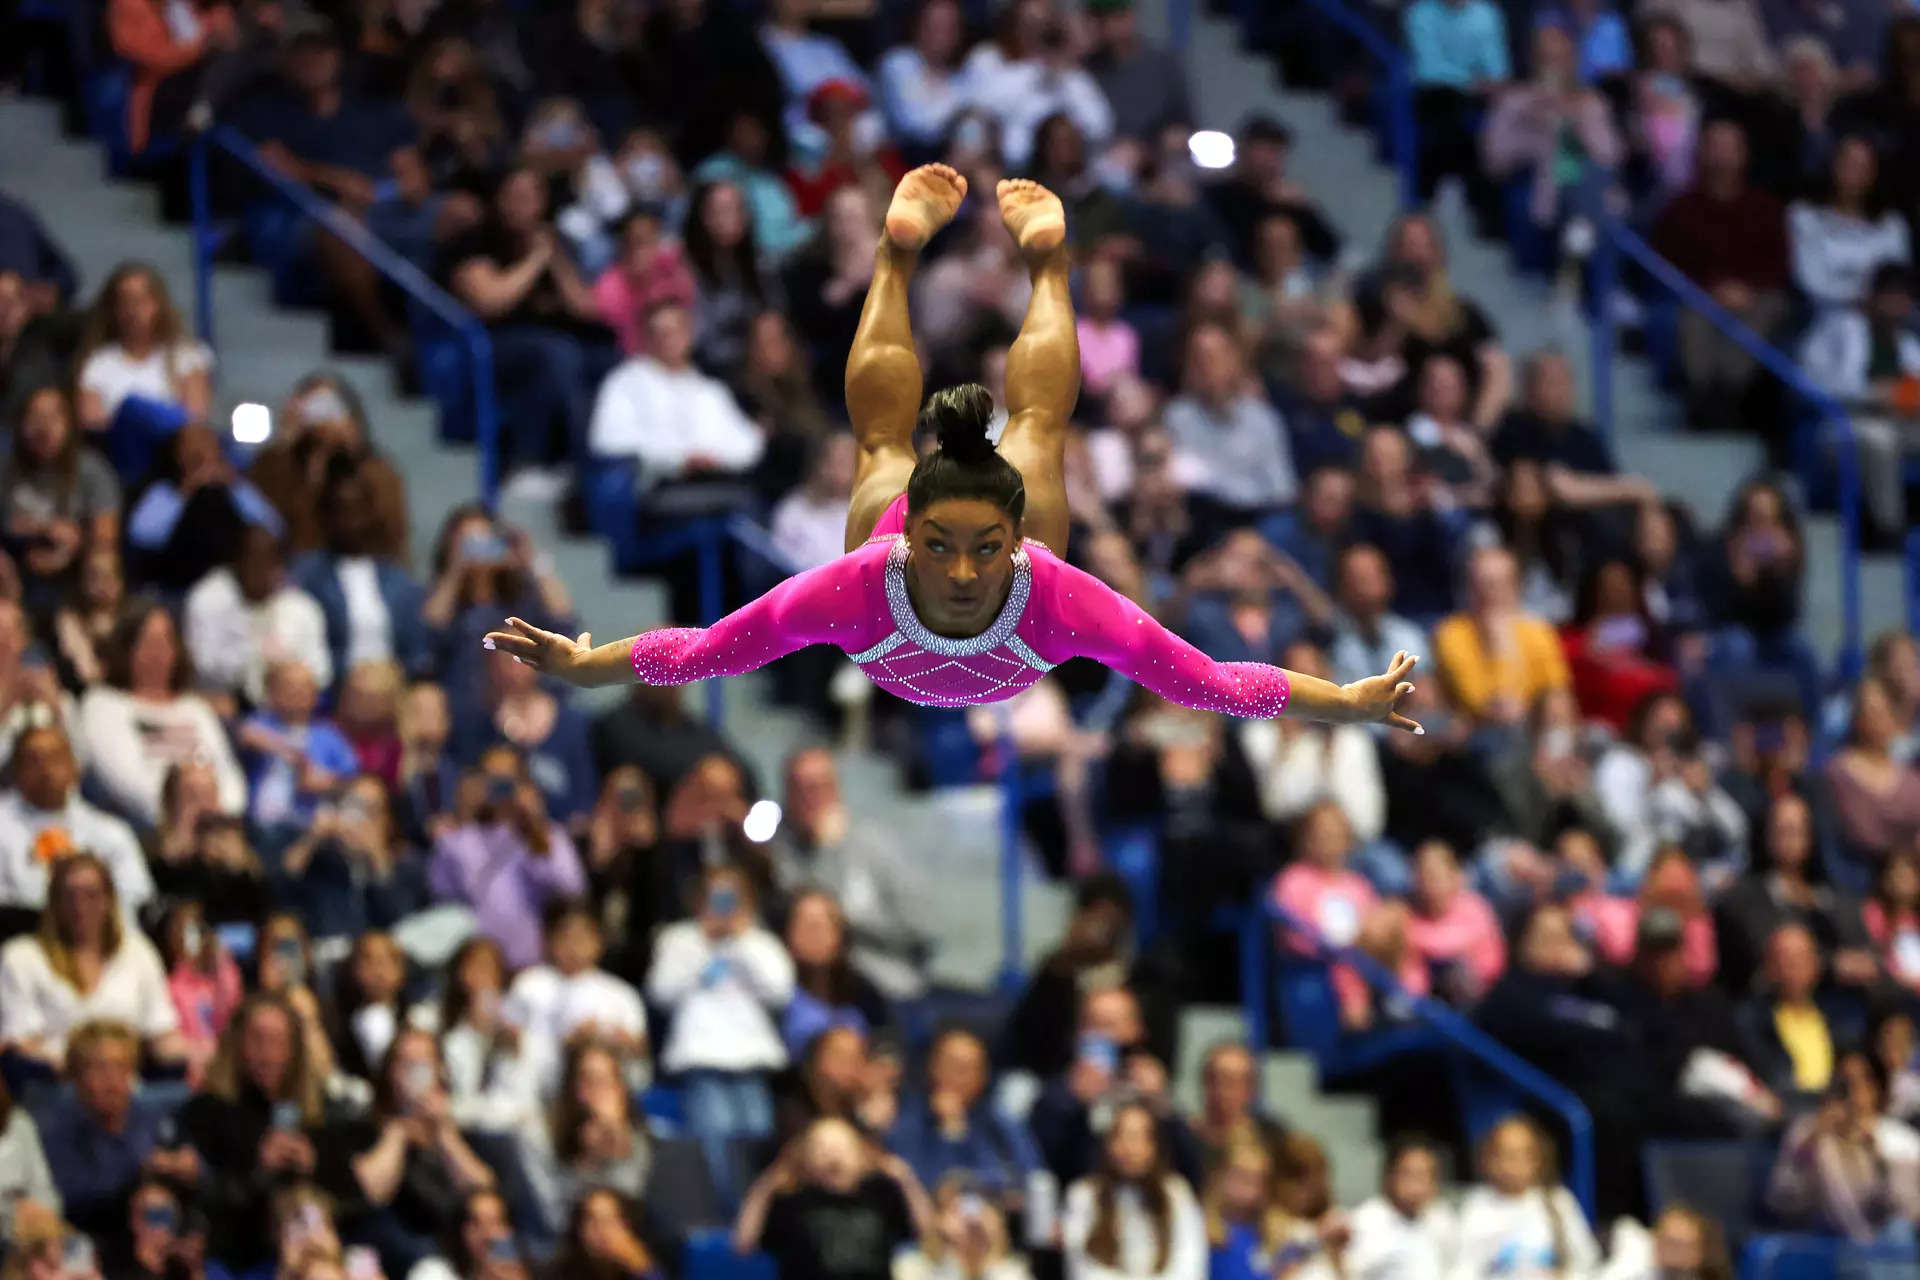 “One of the most powerful comebacks in history”: Netflix release trailer of ‘Simone Biles Rising’ 